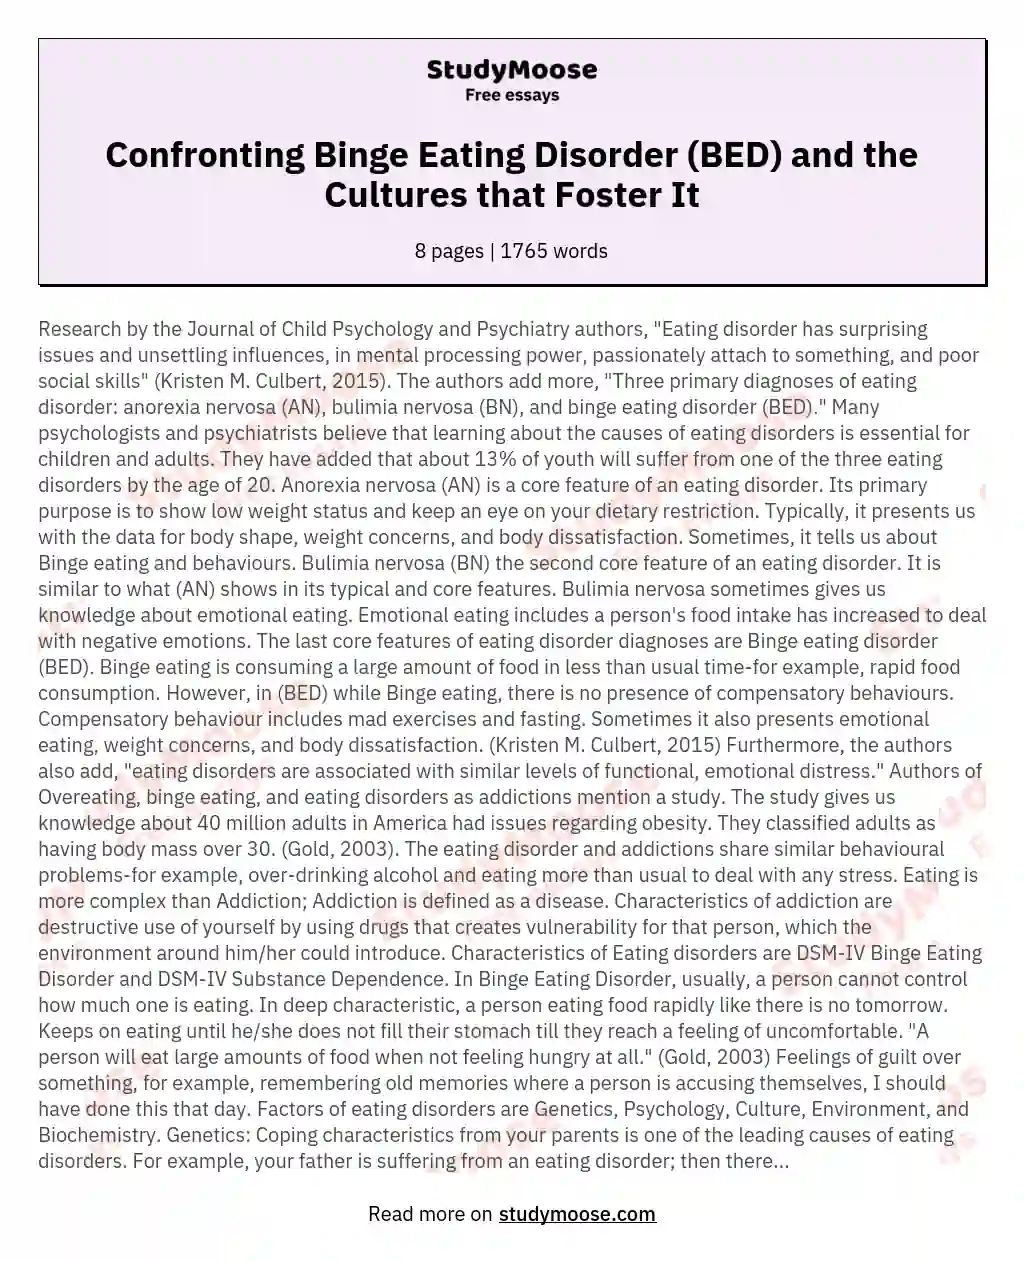 Confronting Binge Eating Disorder (BED) and the Cultures that Foster It essay